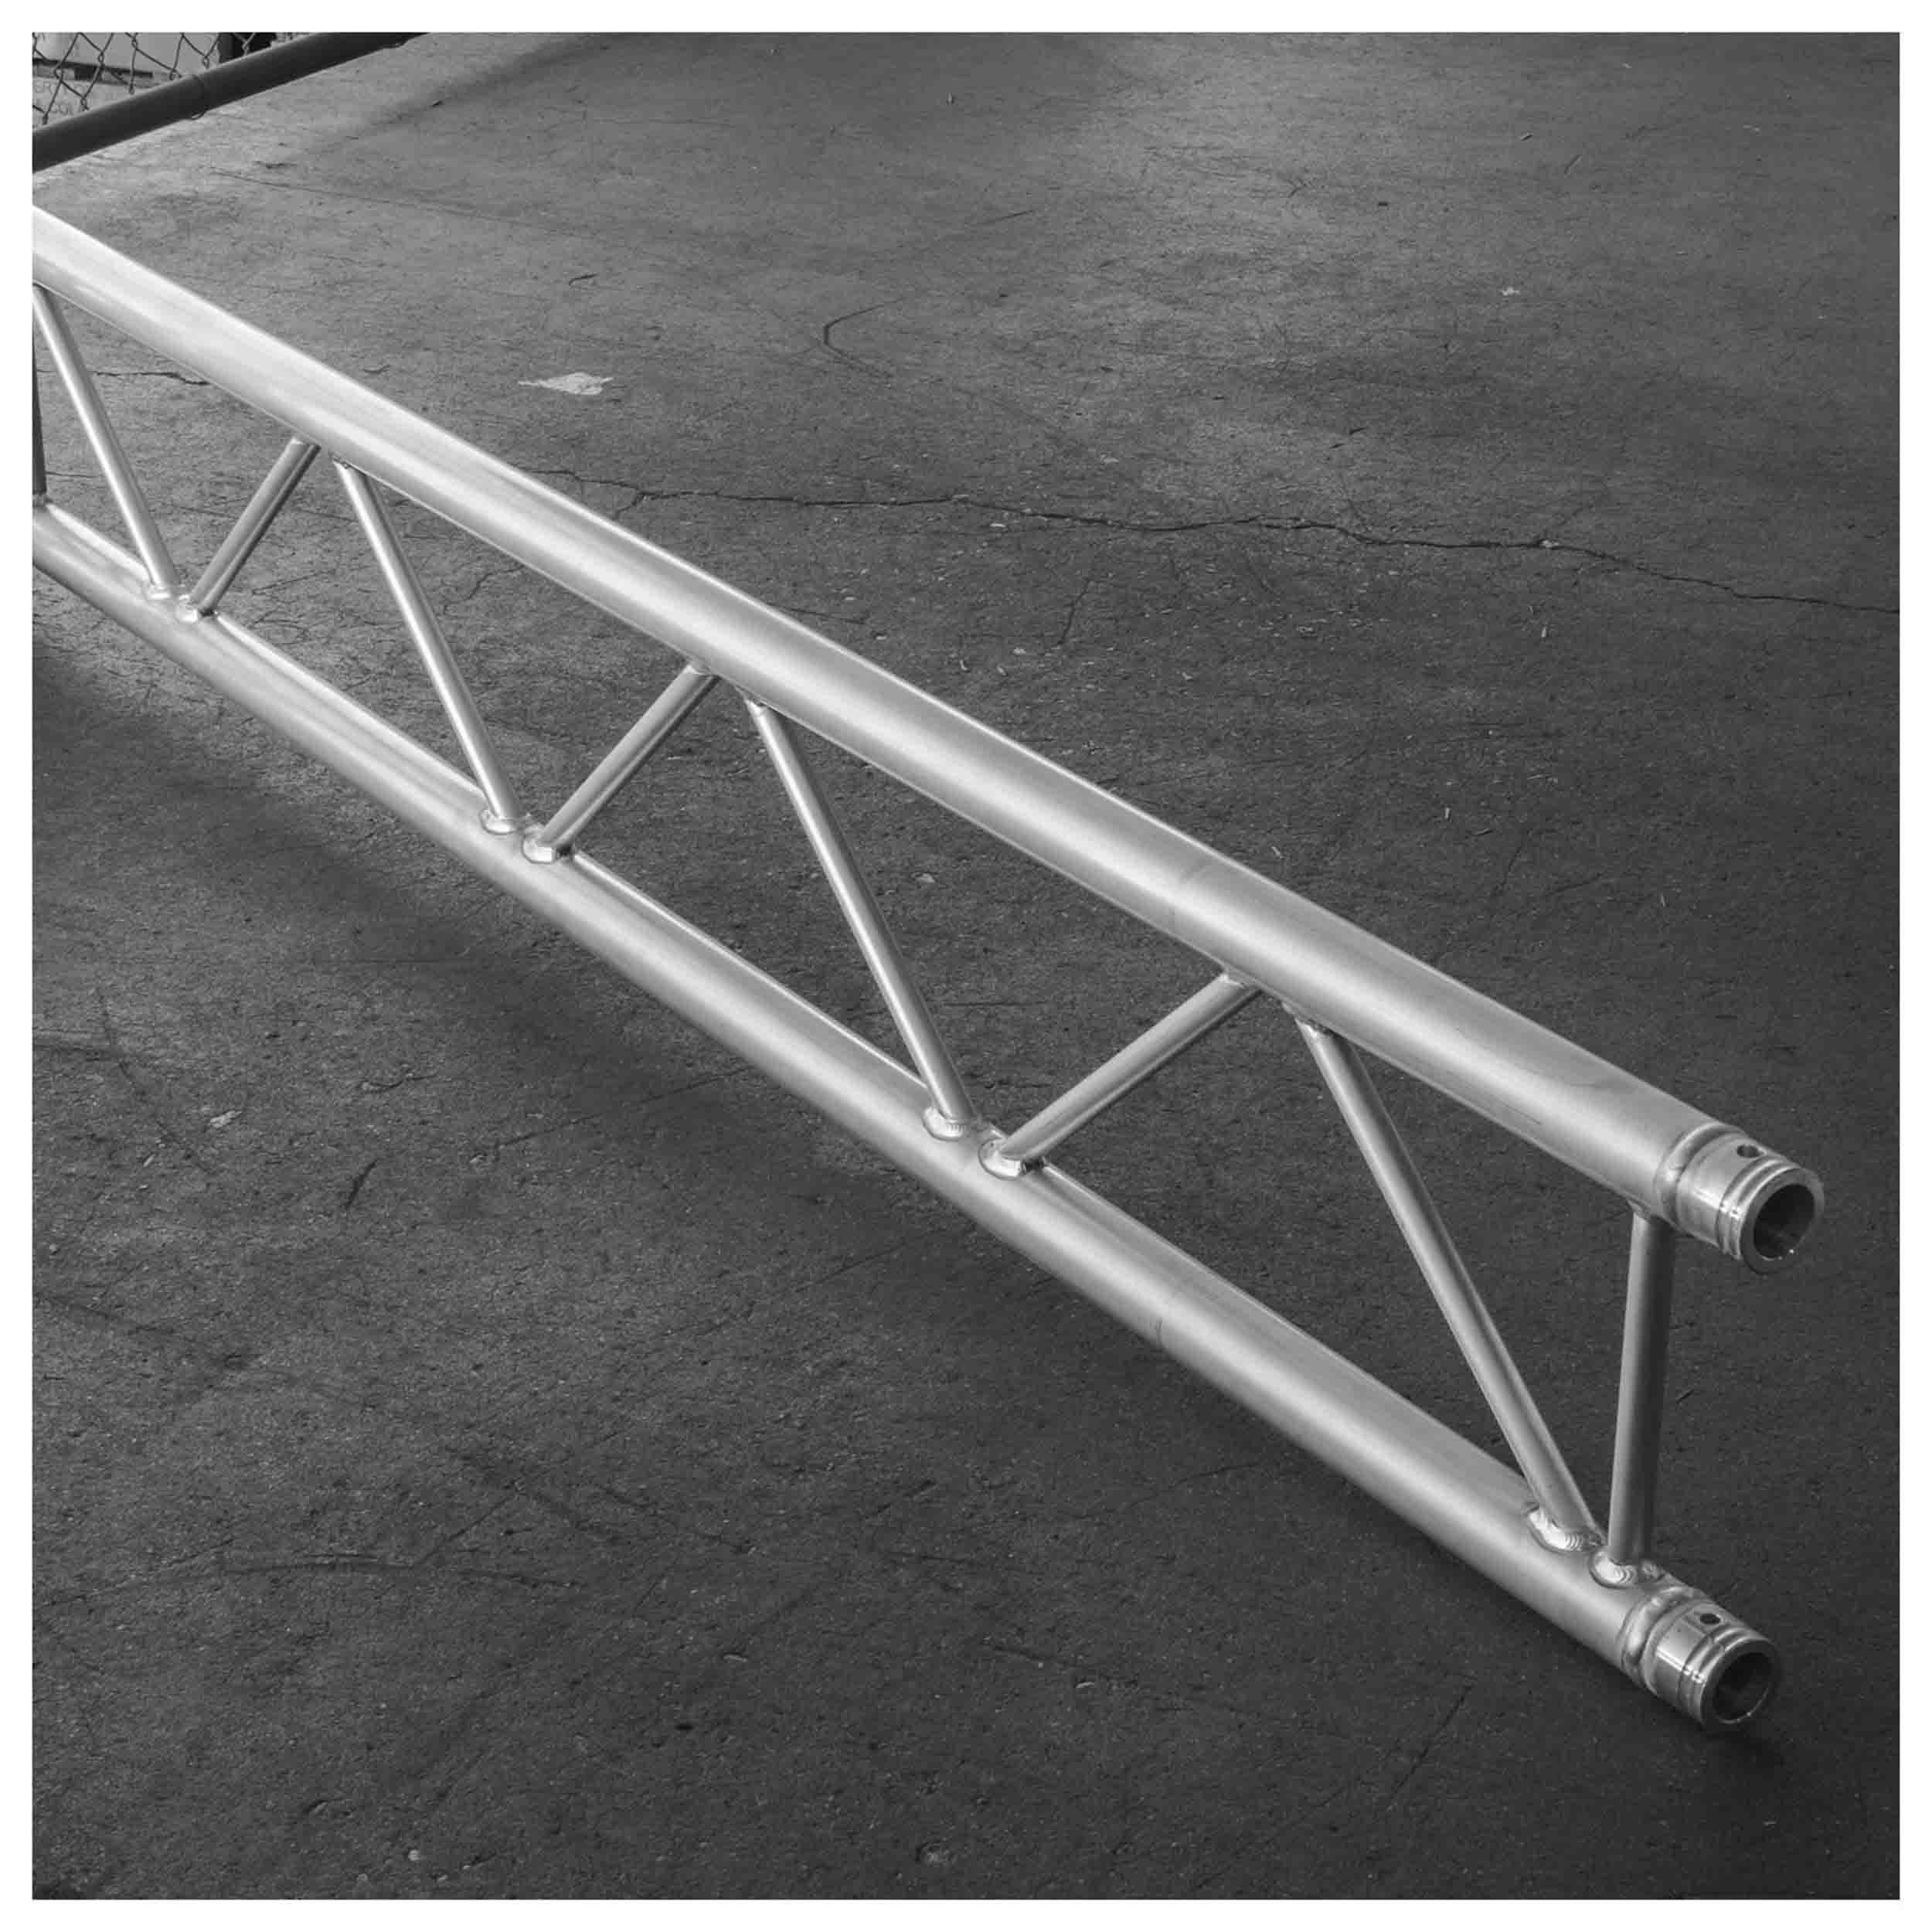 Show Solutions SCT290-220, 290 mm x 290 mm iConical Ladder Truss by Show Solutions